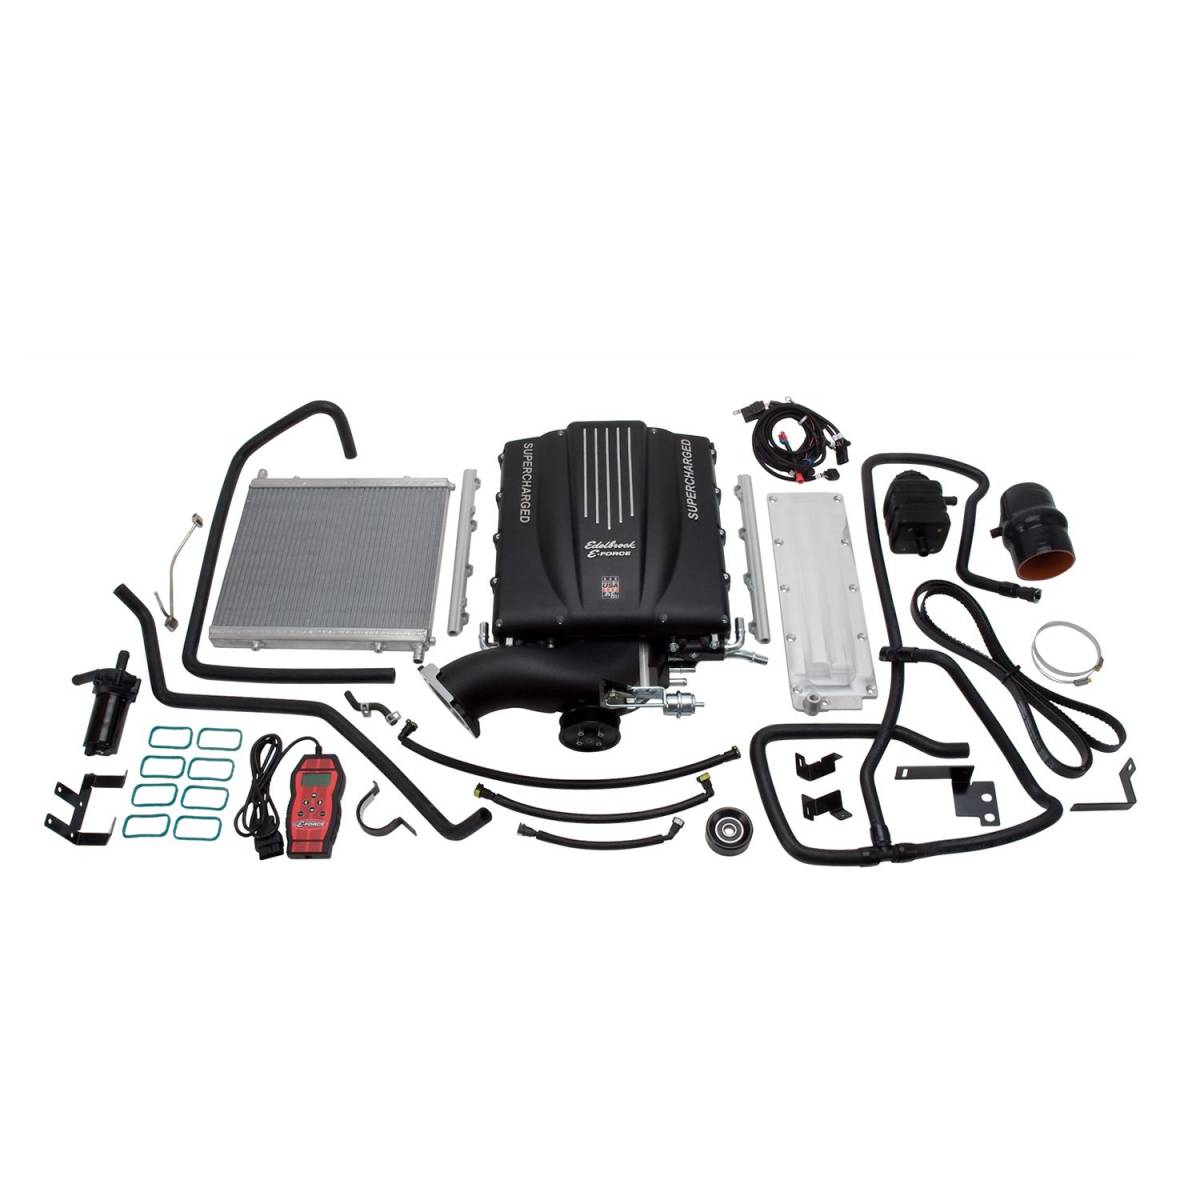 Edelbrock - Chevy Silverado GMC Sierra 6.2L 2007-2013 Edelbrock Stage 1 Complete Supercharger Intercooled Kit Without Tune - Image 1